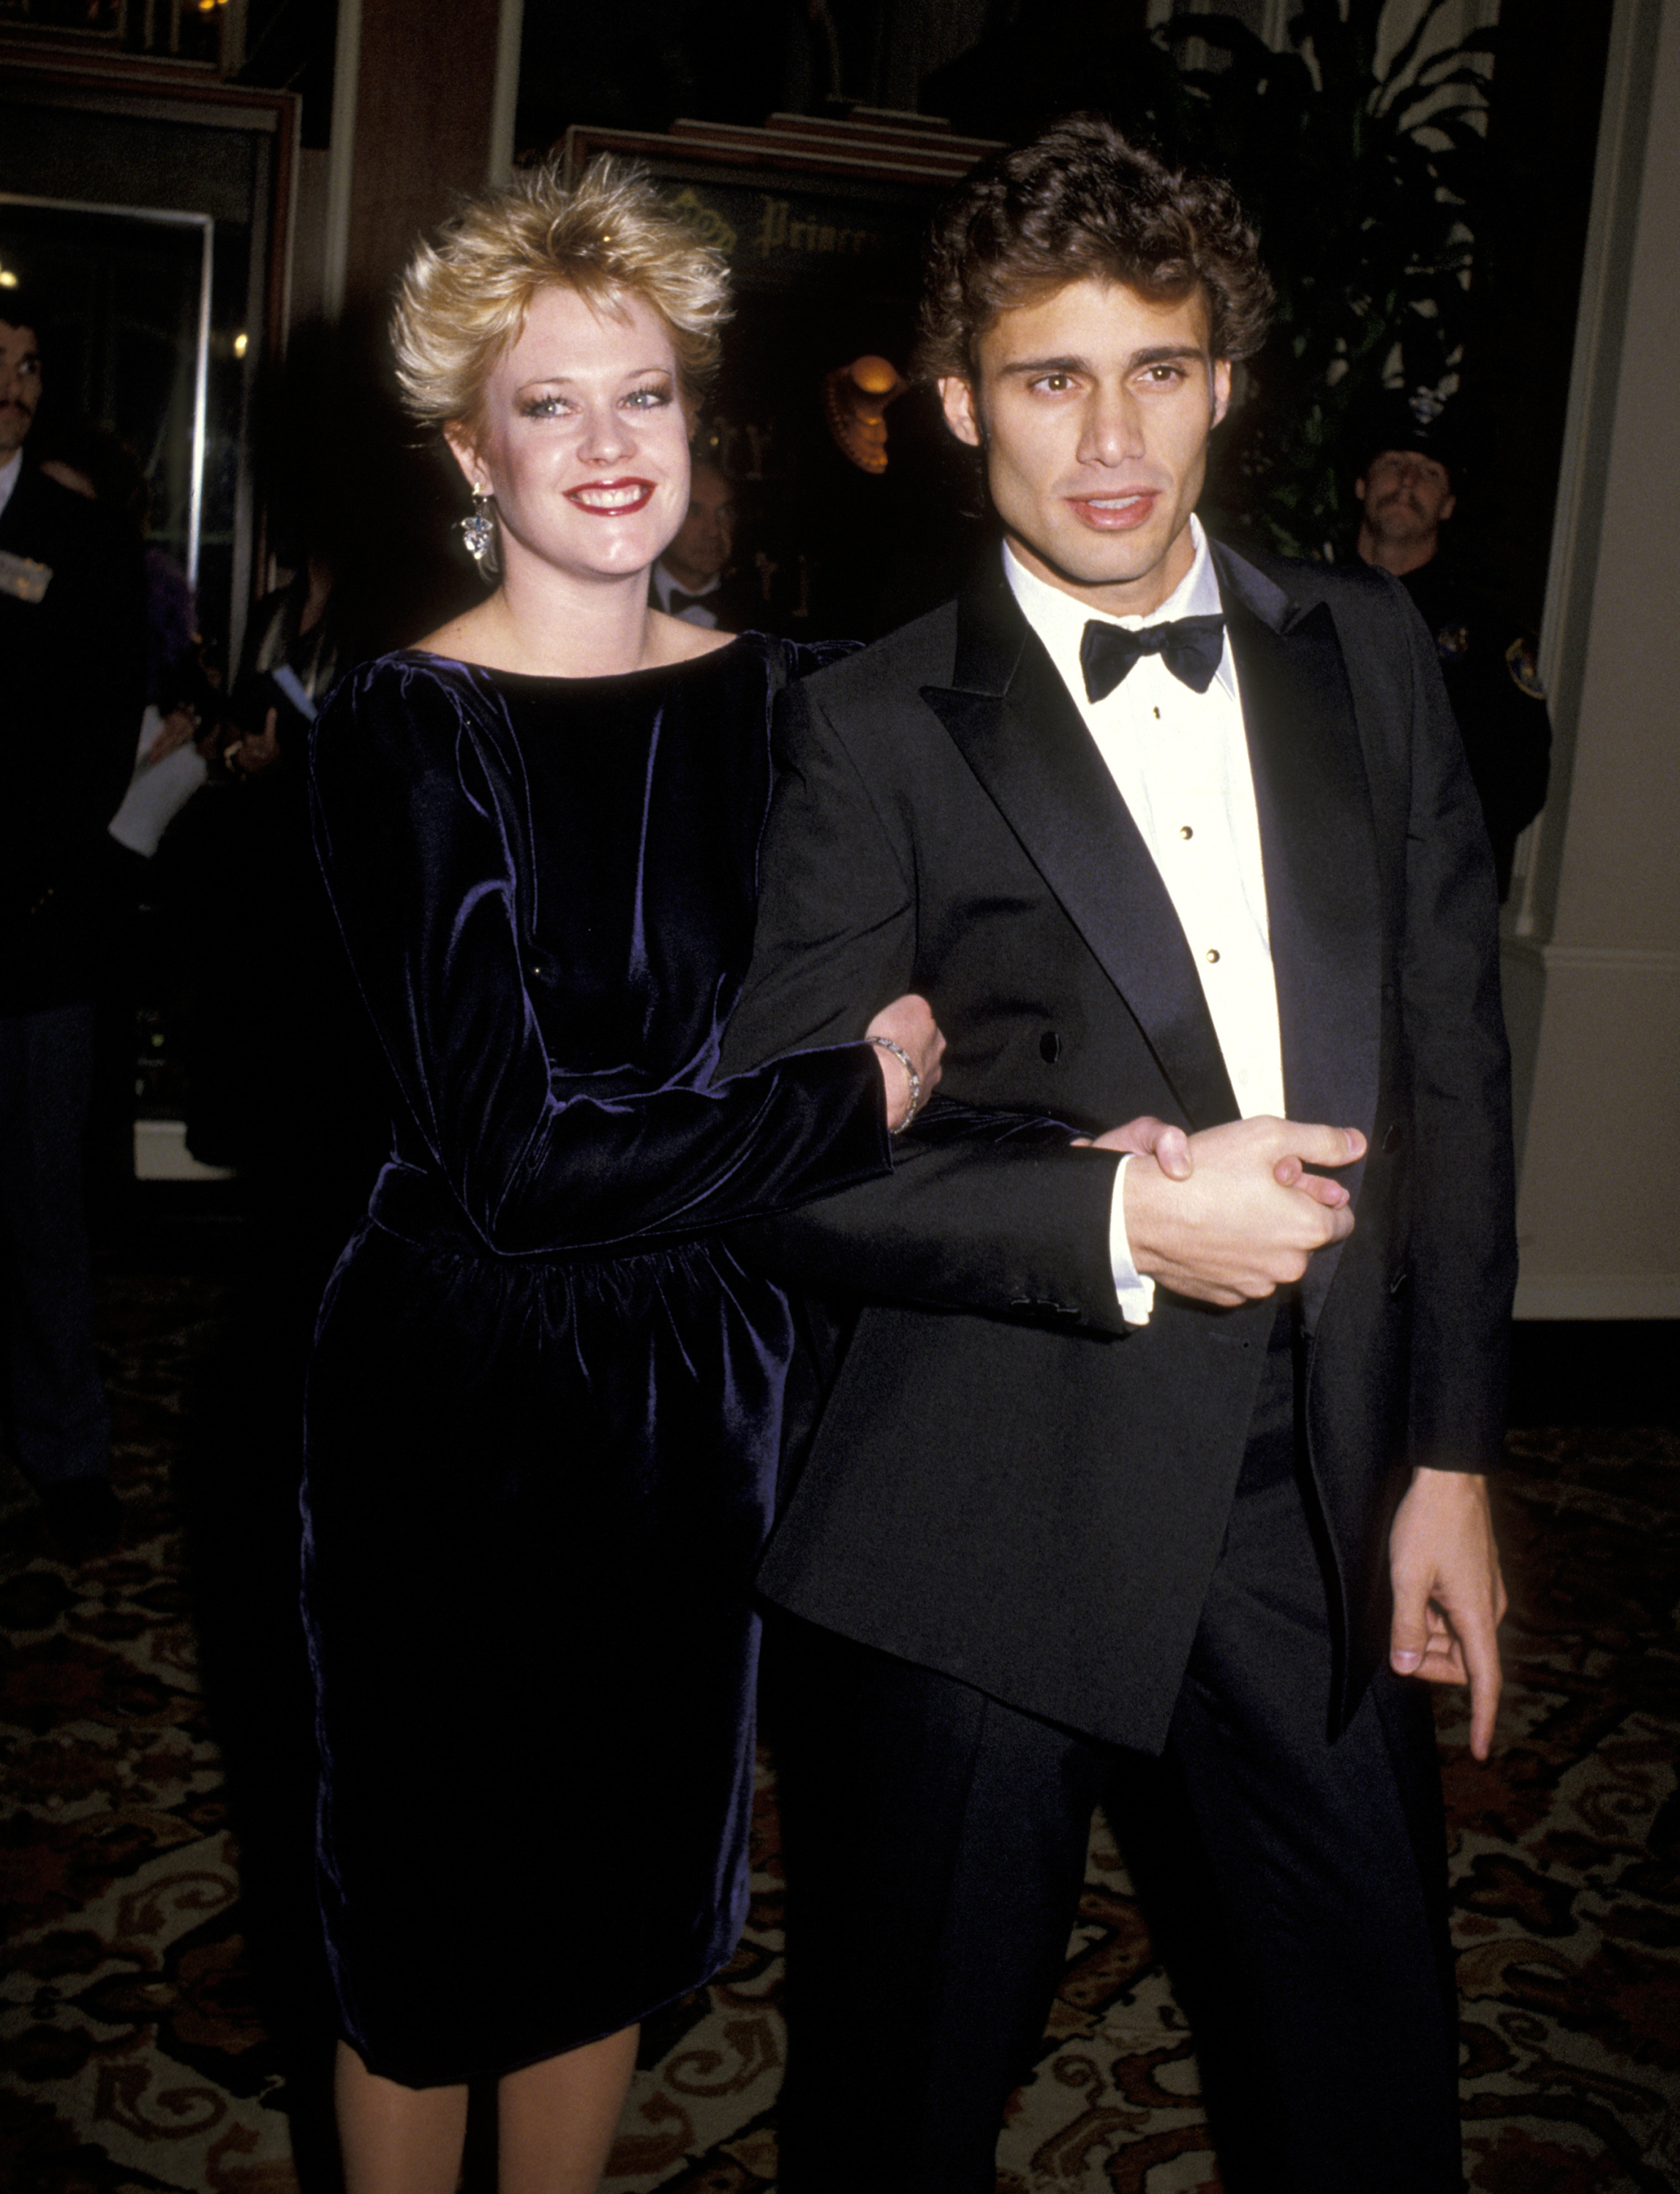 Steven Bauer and Melanie Griffith at the 42nd Annual Golden Globe Awards on January 26, 1985. | Source: Getty Images